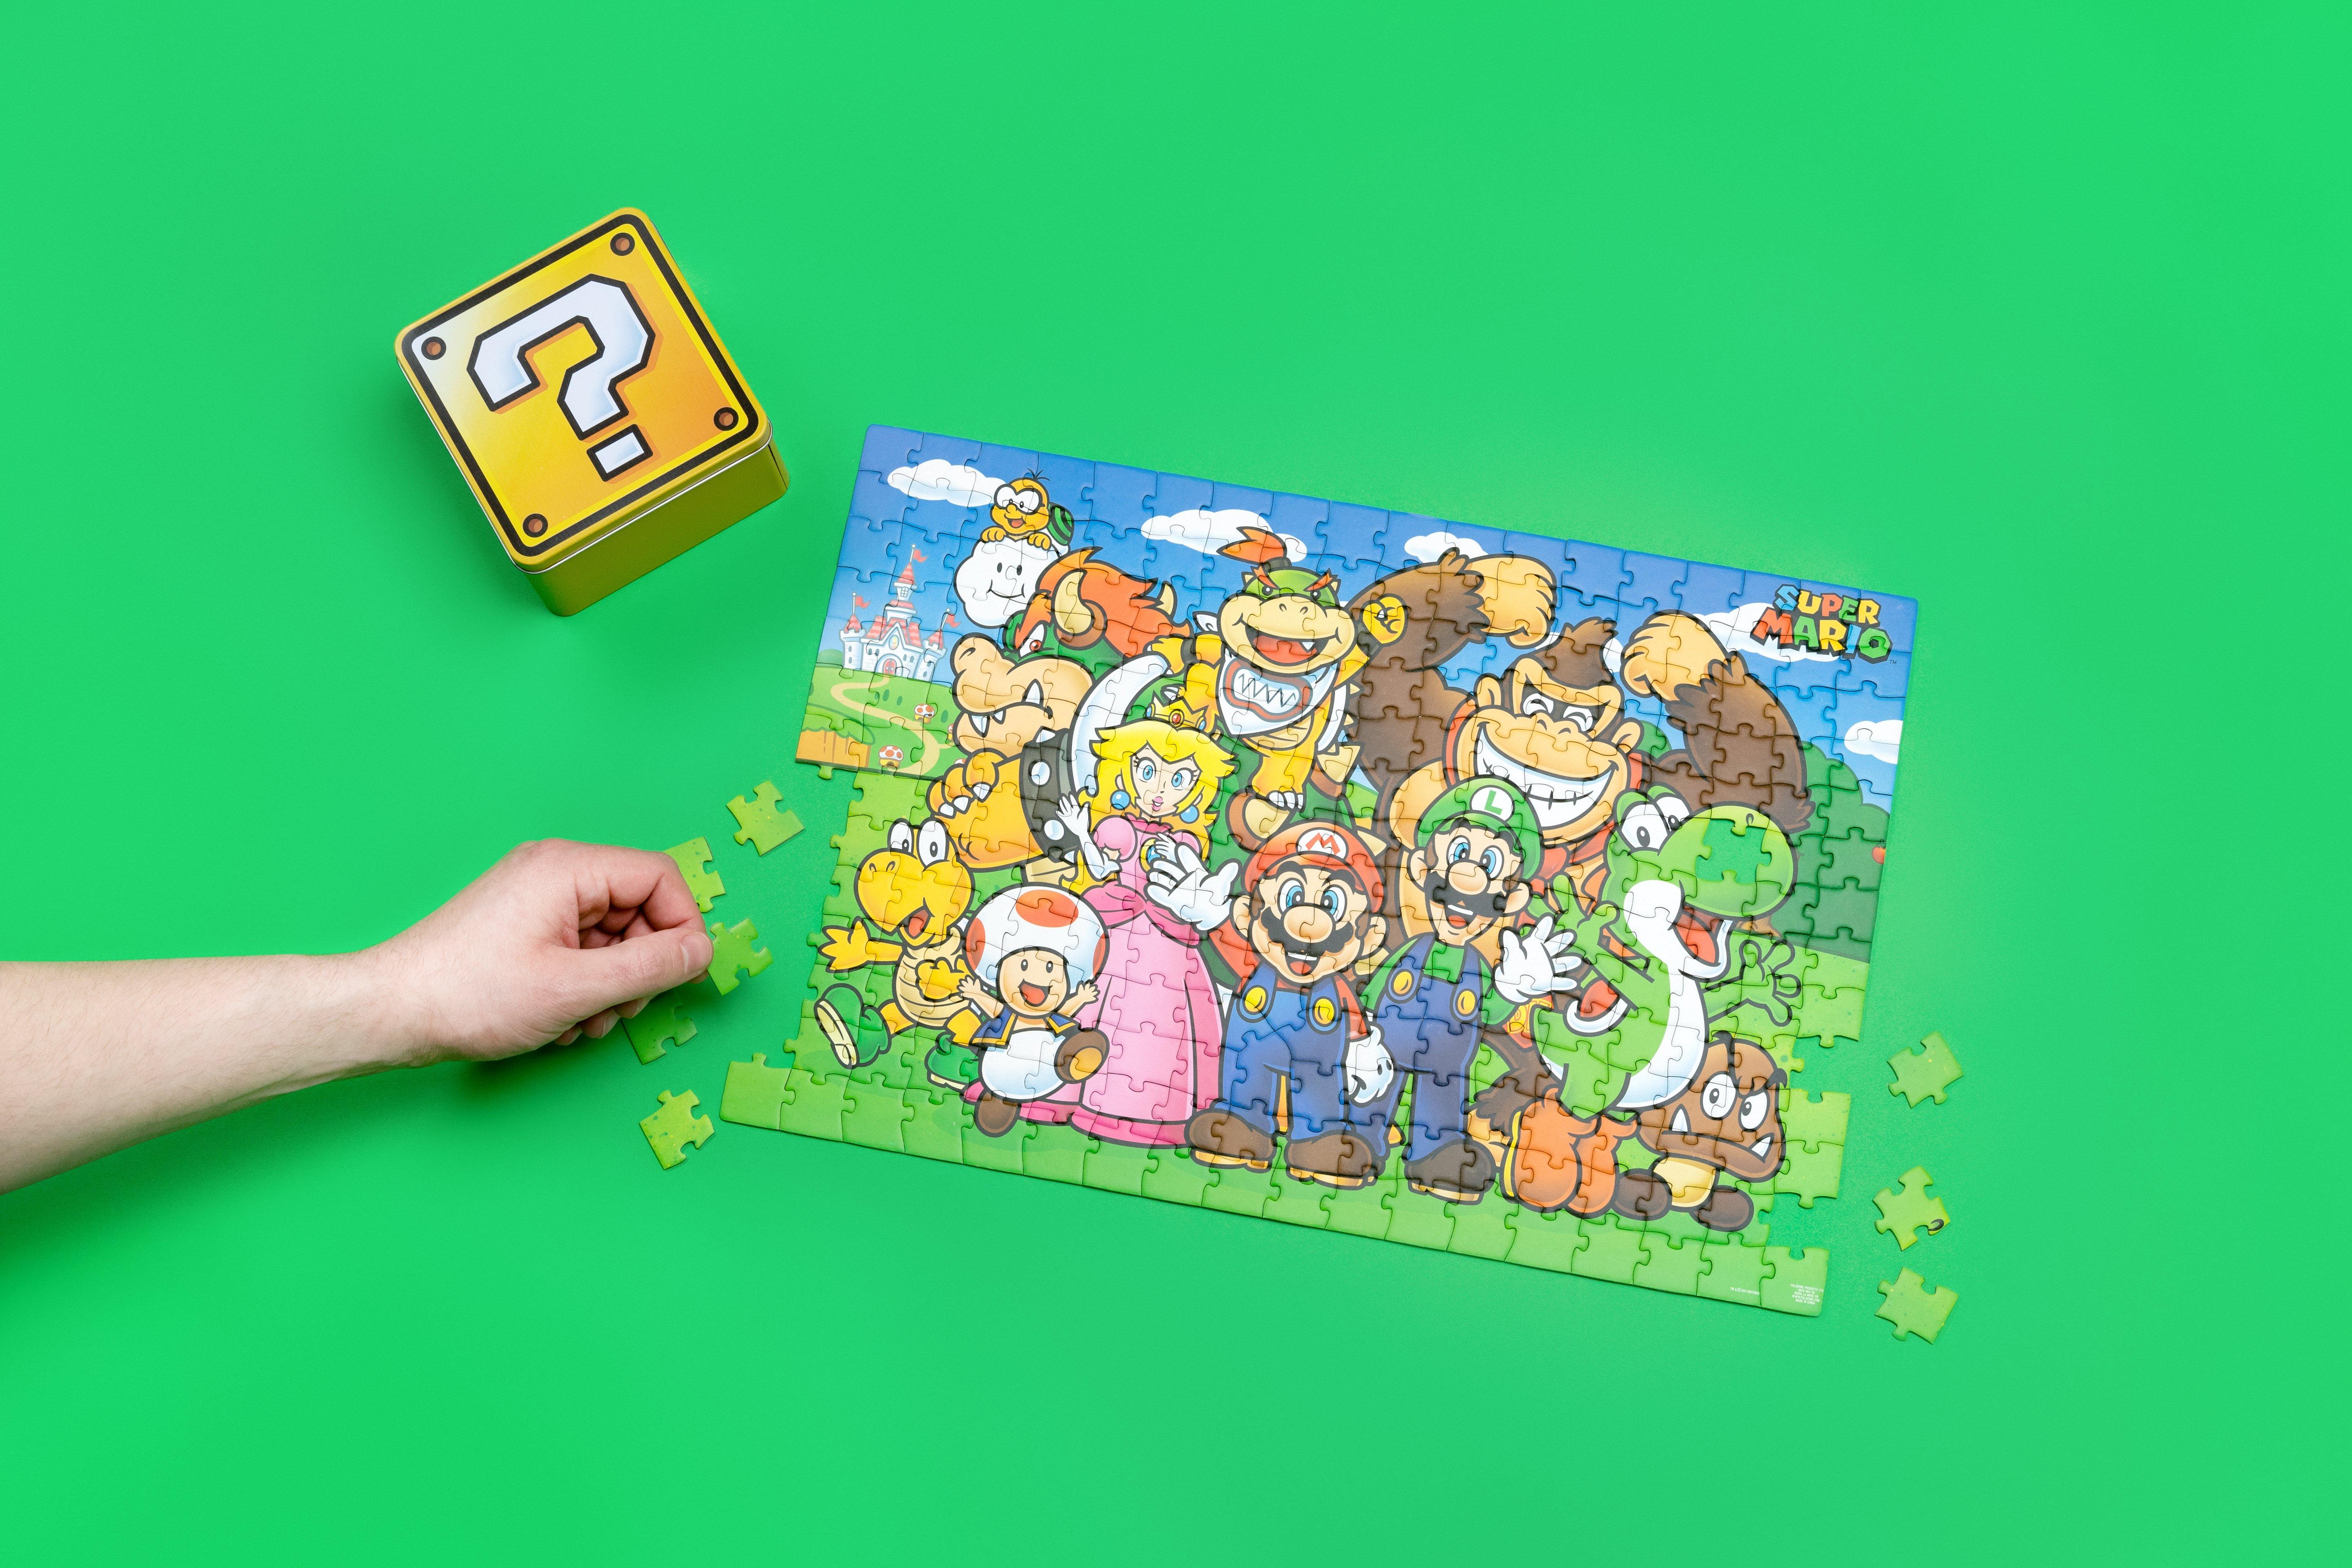 Super Mario 1,000-piece Action Puzzle from just $10 at GameStop (50% off)